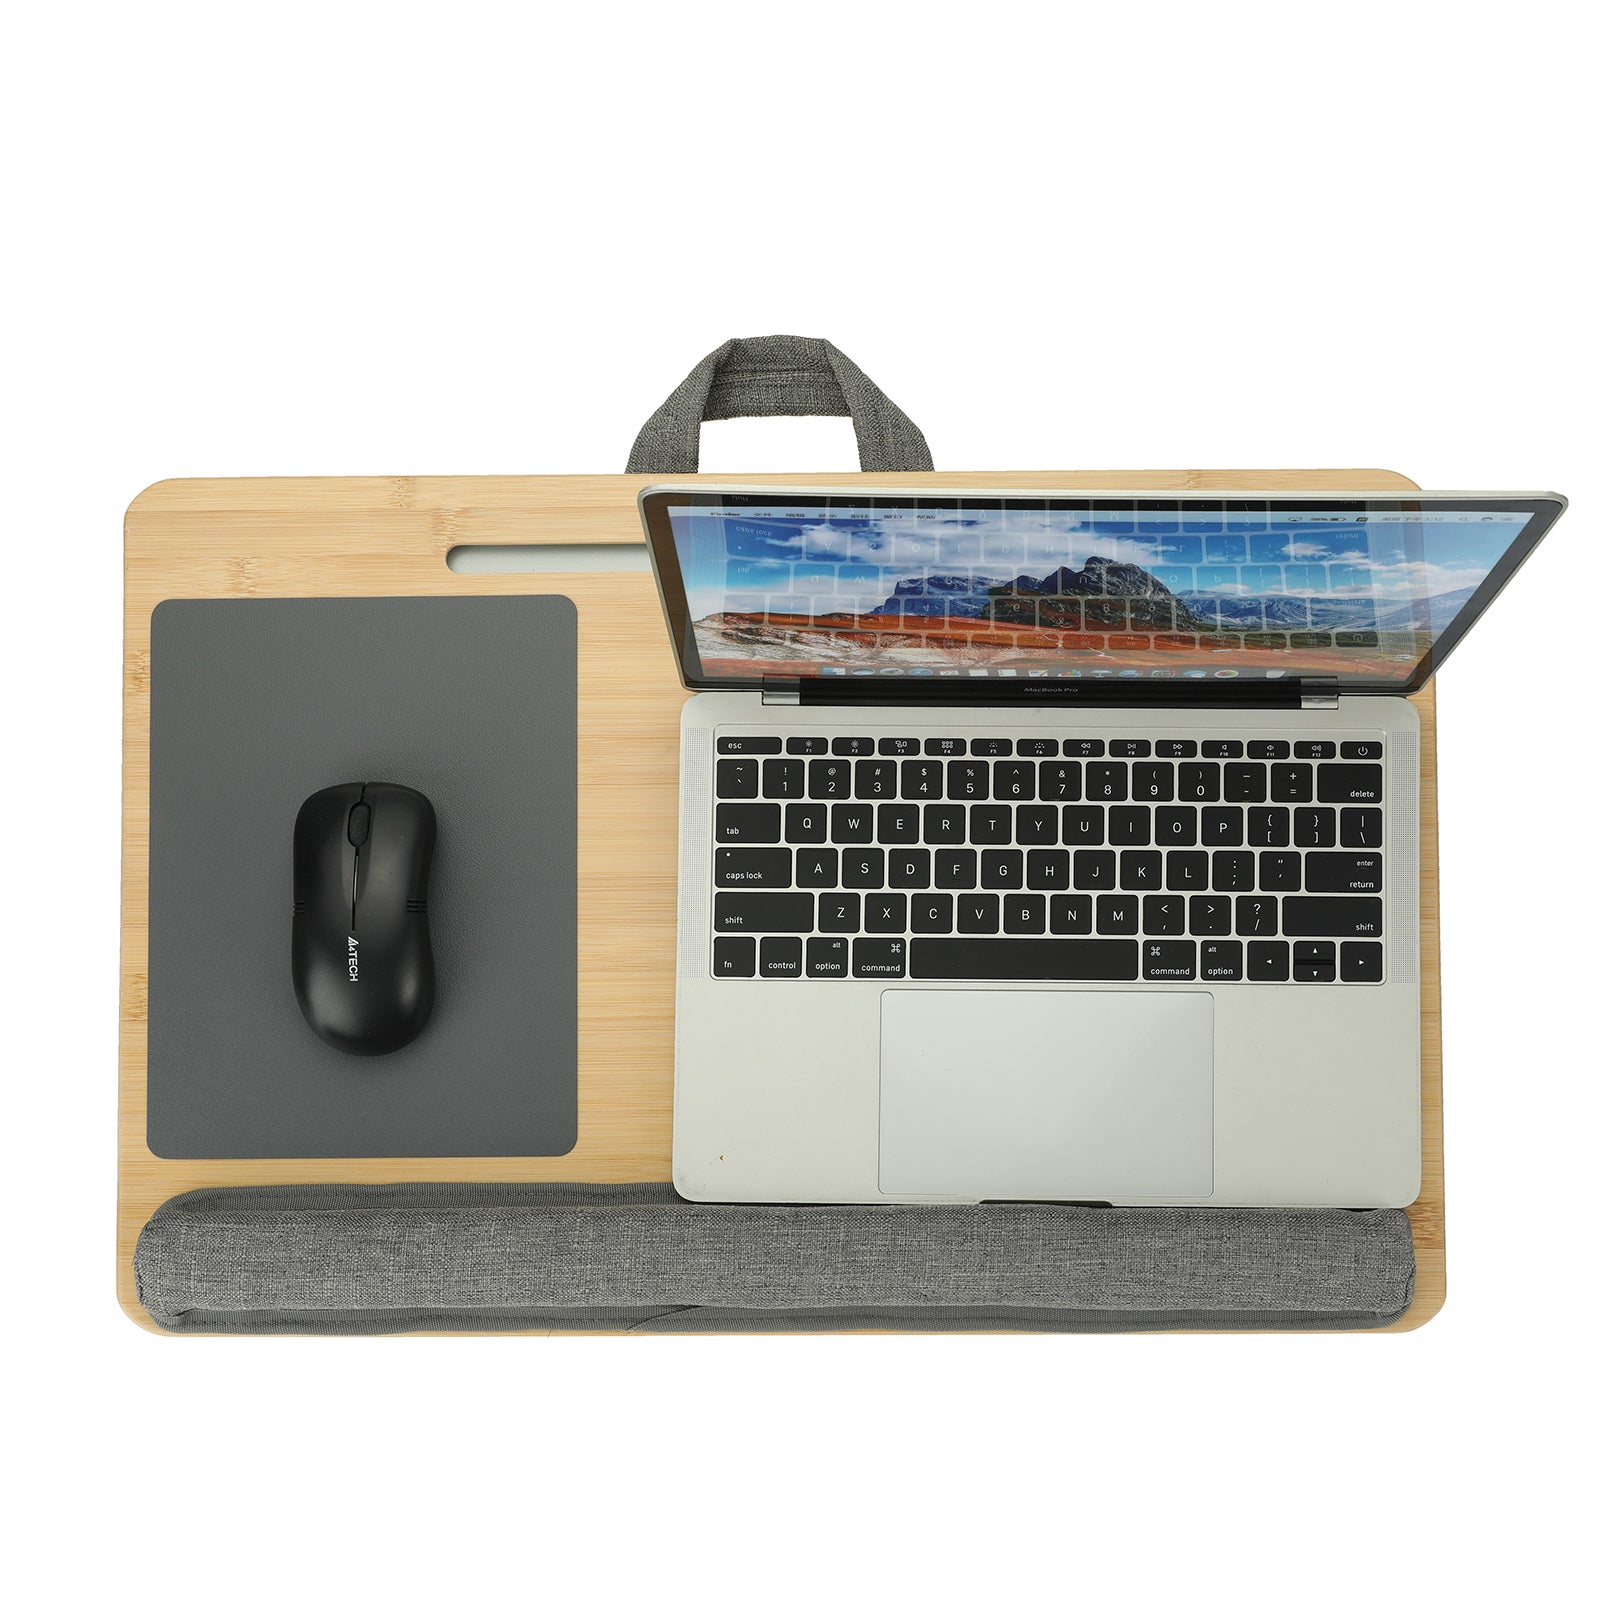 TOOCA Bamboo Lap Desk Ambidextrous Large Laptop Desk with Cushion Wrist Rest & Slot for Tablet Laptop Tray for Bed and Sofa